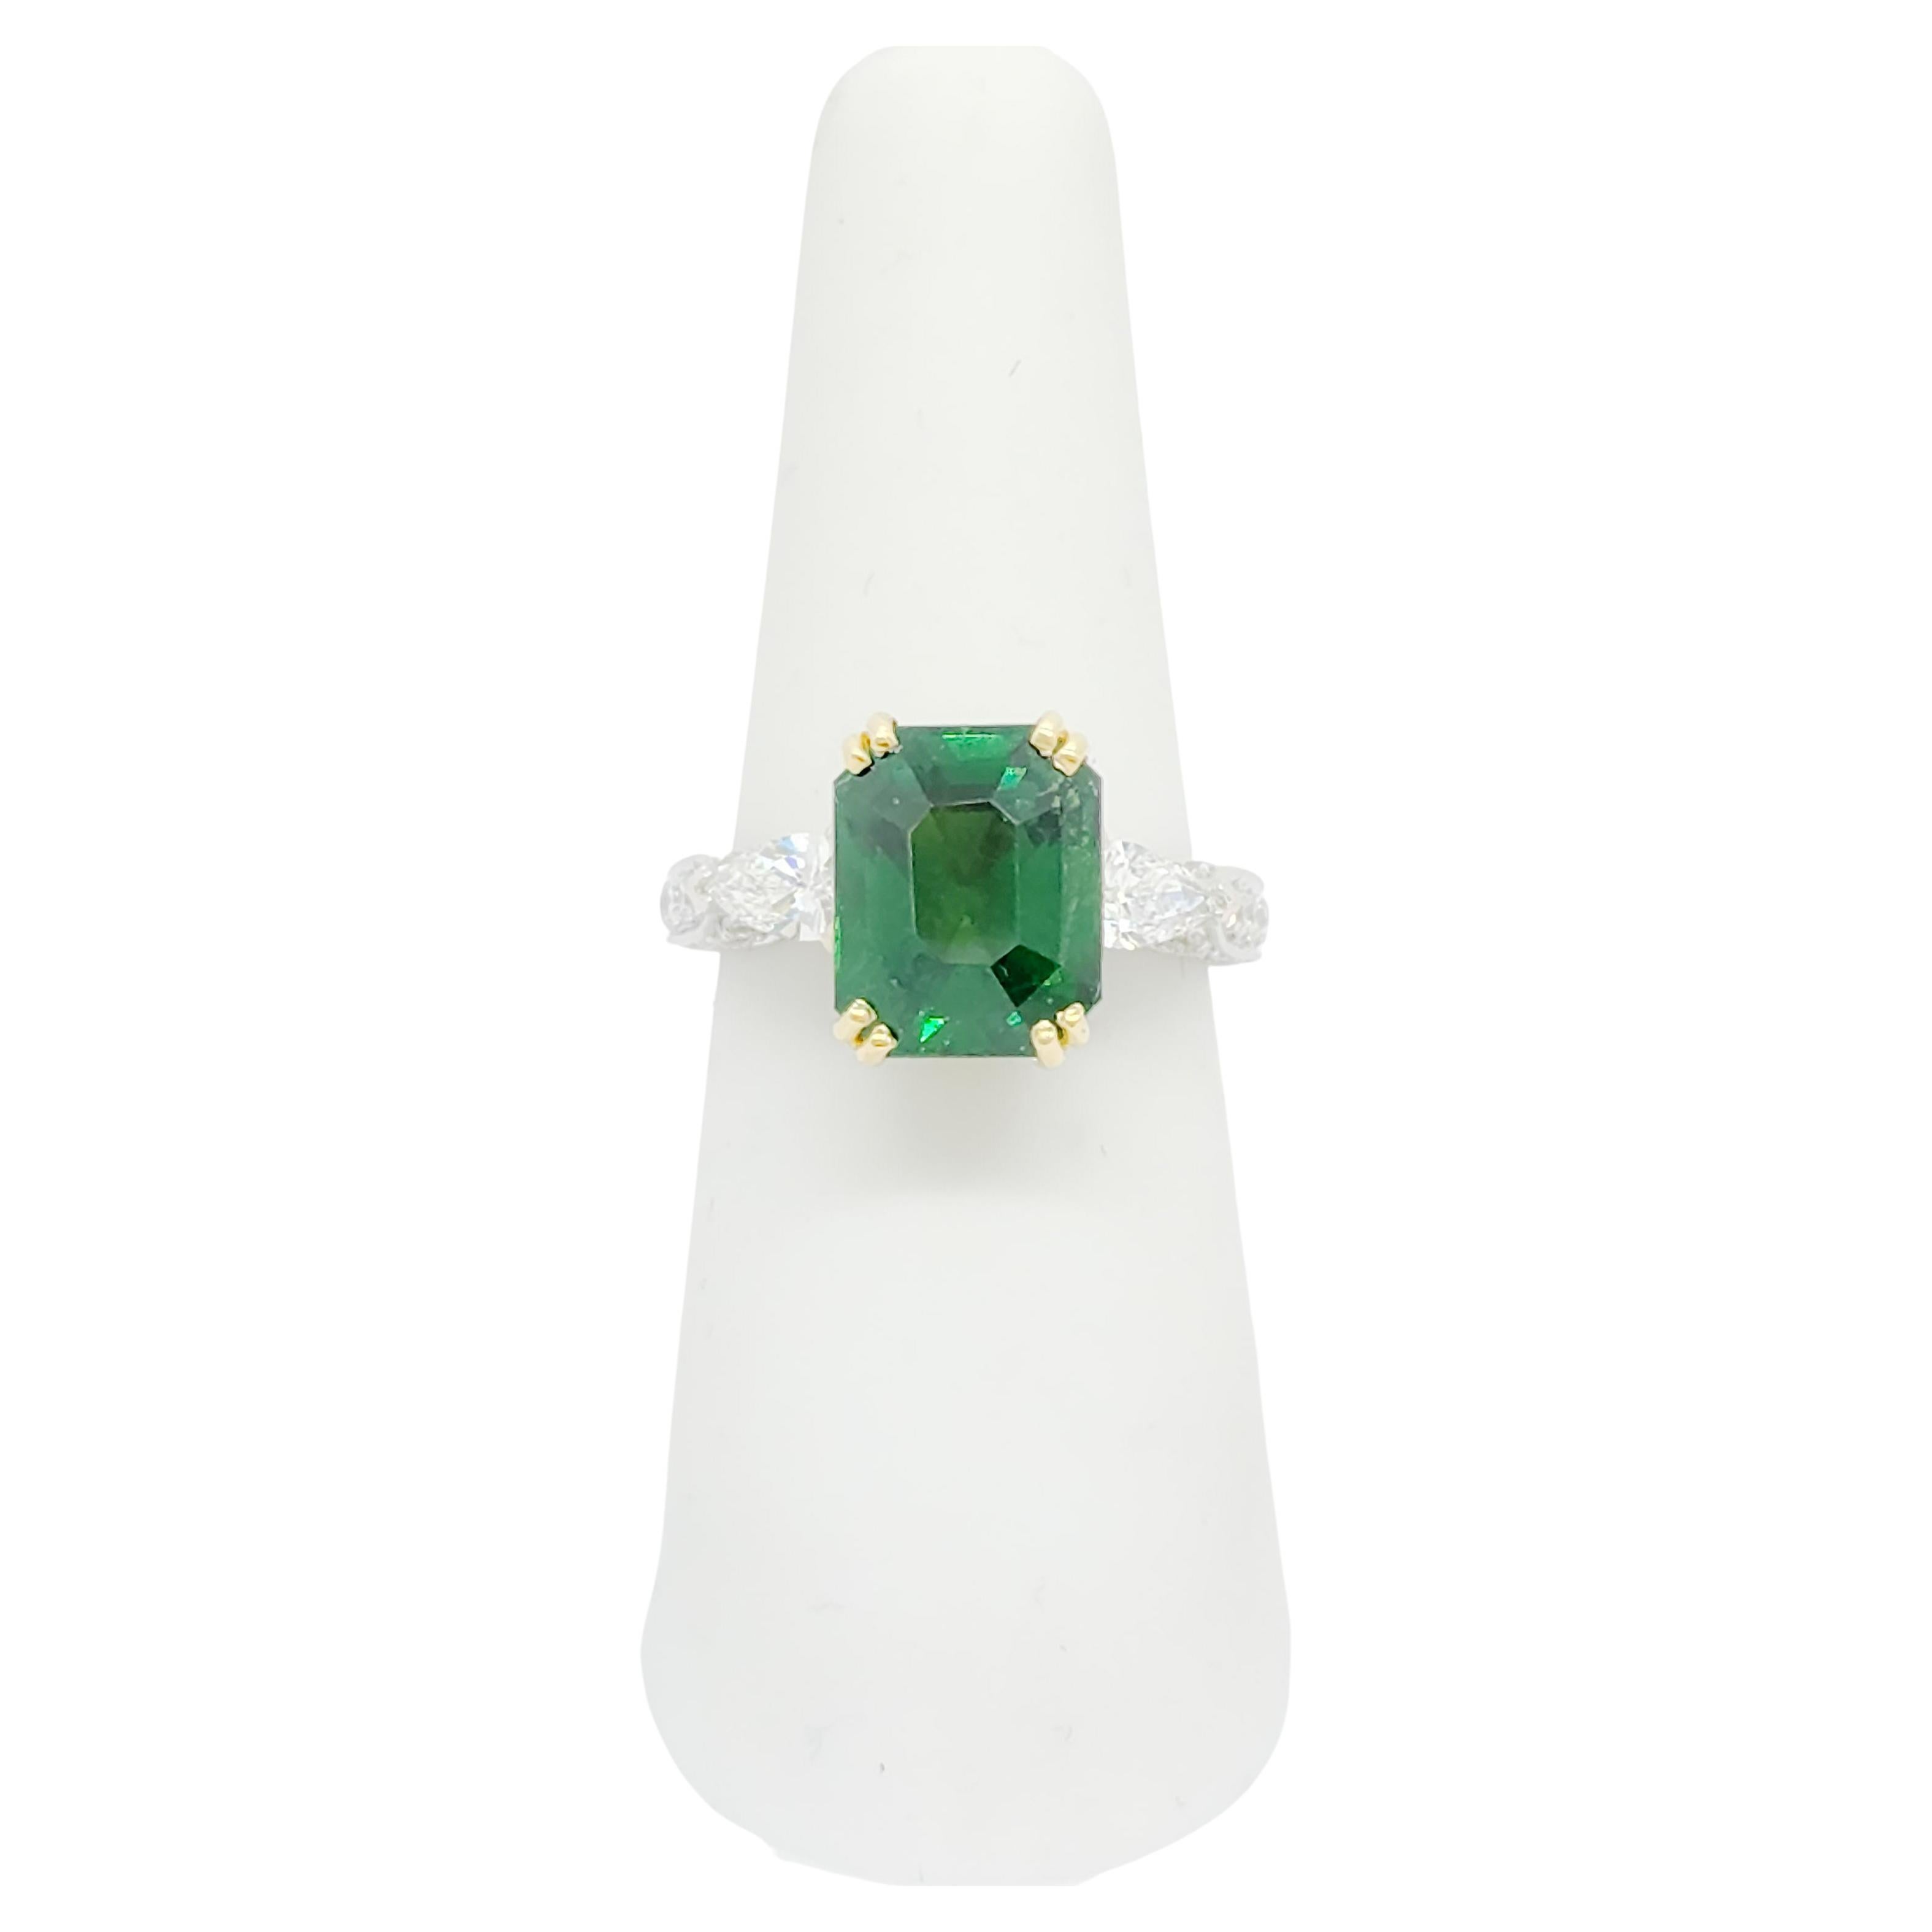 Beautiful 5.12 ct. tsavorite garnet octagon with 0.98 ct. good quality white diamond pear shapes and rounds.  Handmade in 18k yellow and white gold.  Ring size 6.5.